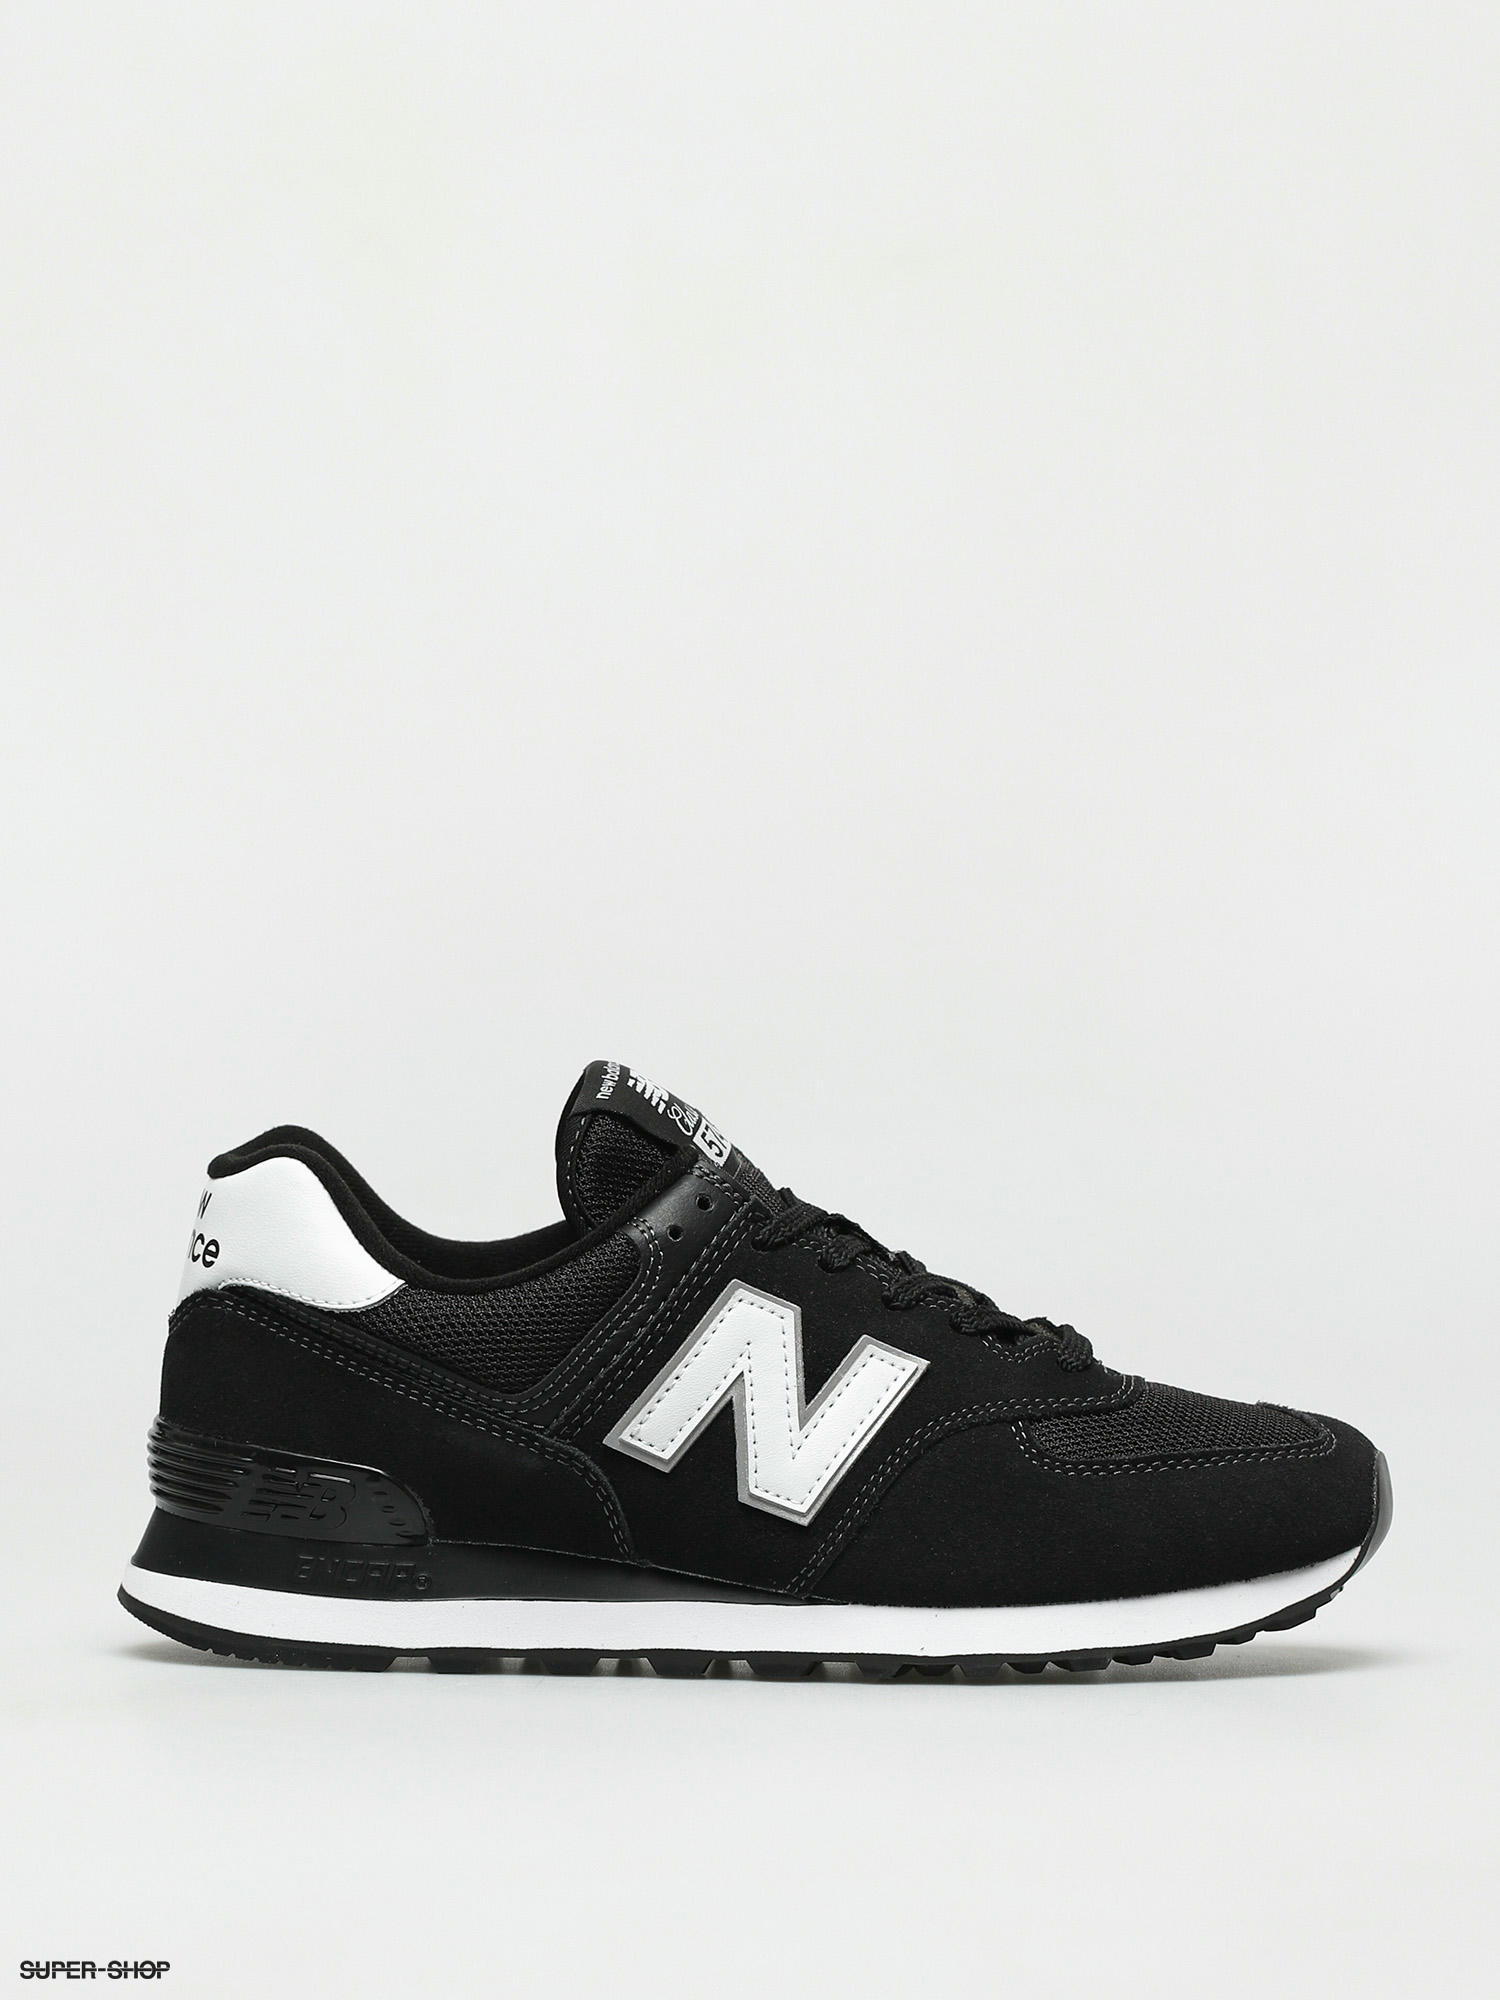 new balance shoes black and white